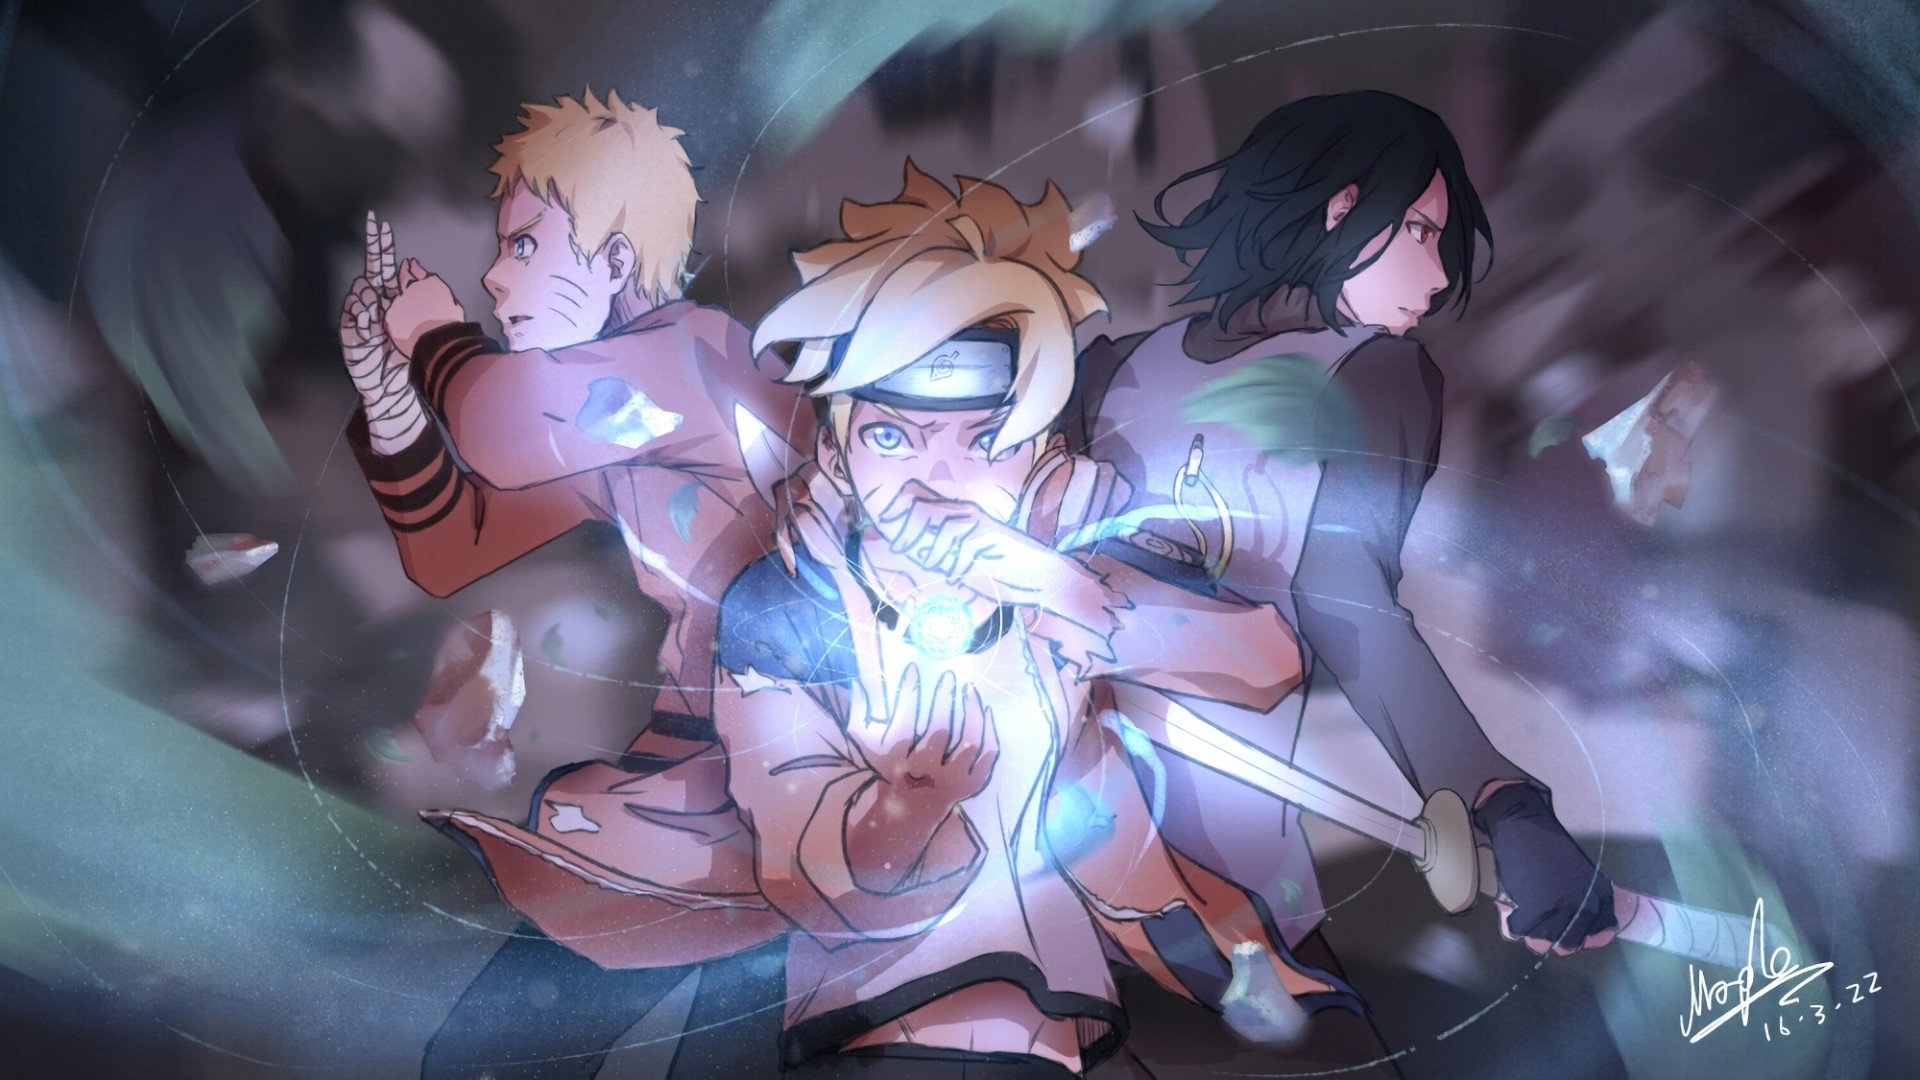 Best Boruto Naruto The Movie Wallpaper ID327447 For High